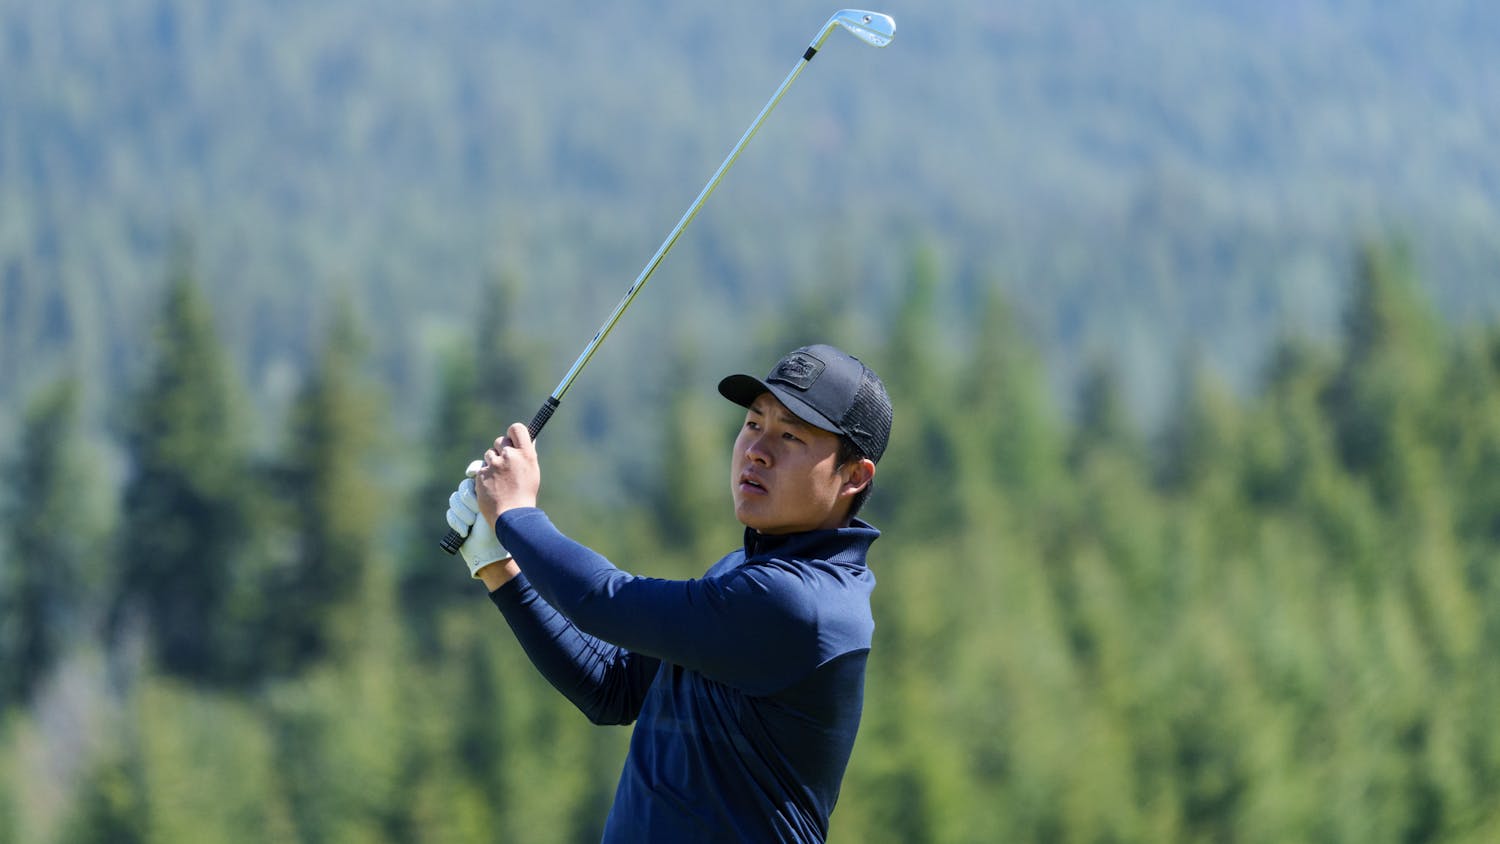 Florida&#x27;s Yuxin Lin of the Florida men&#x27;s golf team competes in the first round of the 2021 NCAA Cle Elum Regional at Tumble Creek Golf Club in Cle Elum, Wash., on May 19, 2021. (Photography by Stephen Brashear/Red Box Pictures)